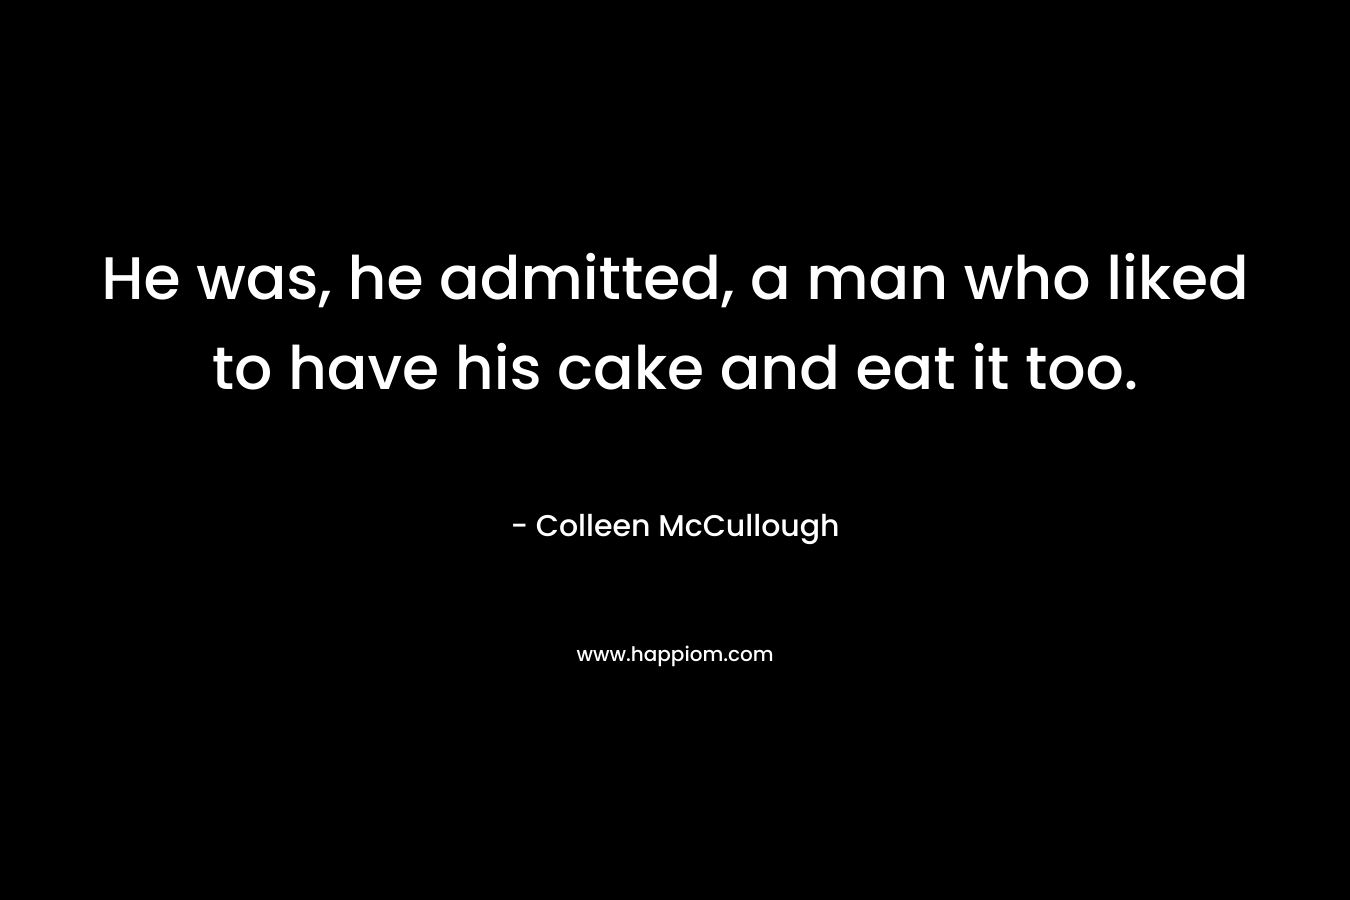 He was, he admitted, a man who liked to have his cake and eat it too. – Colleen McCullough